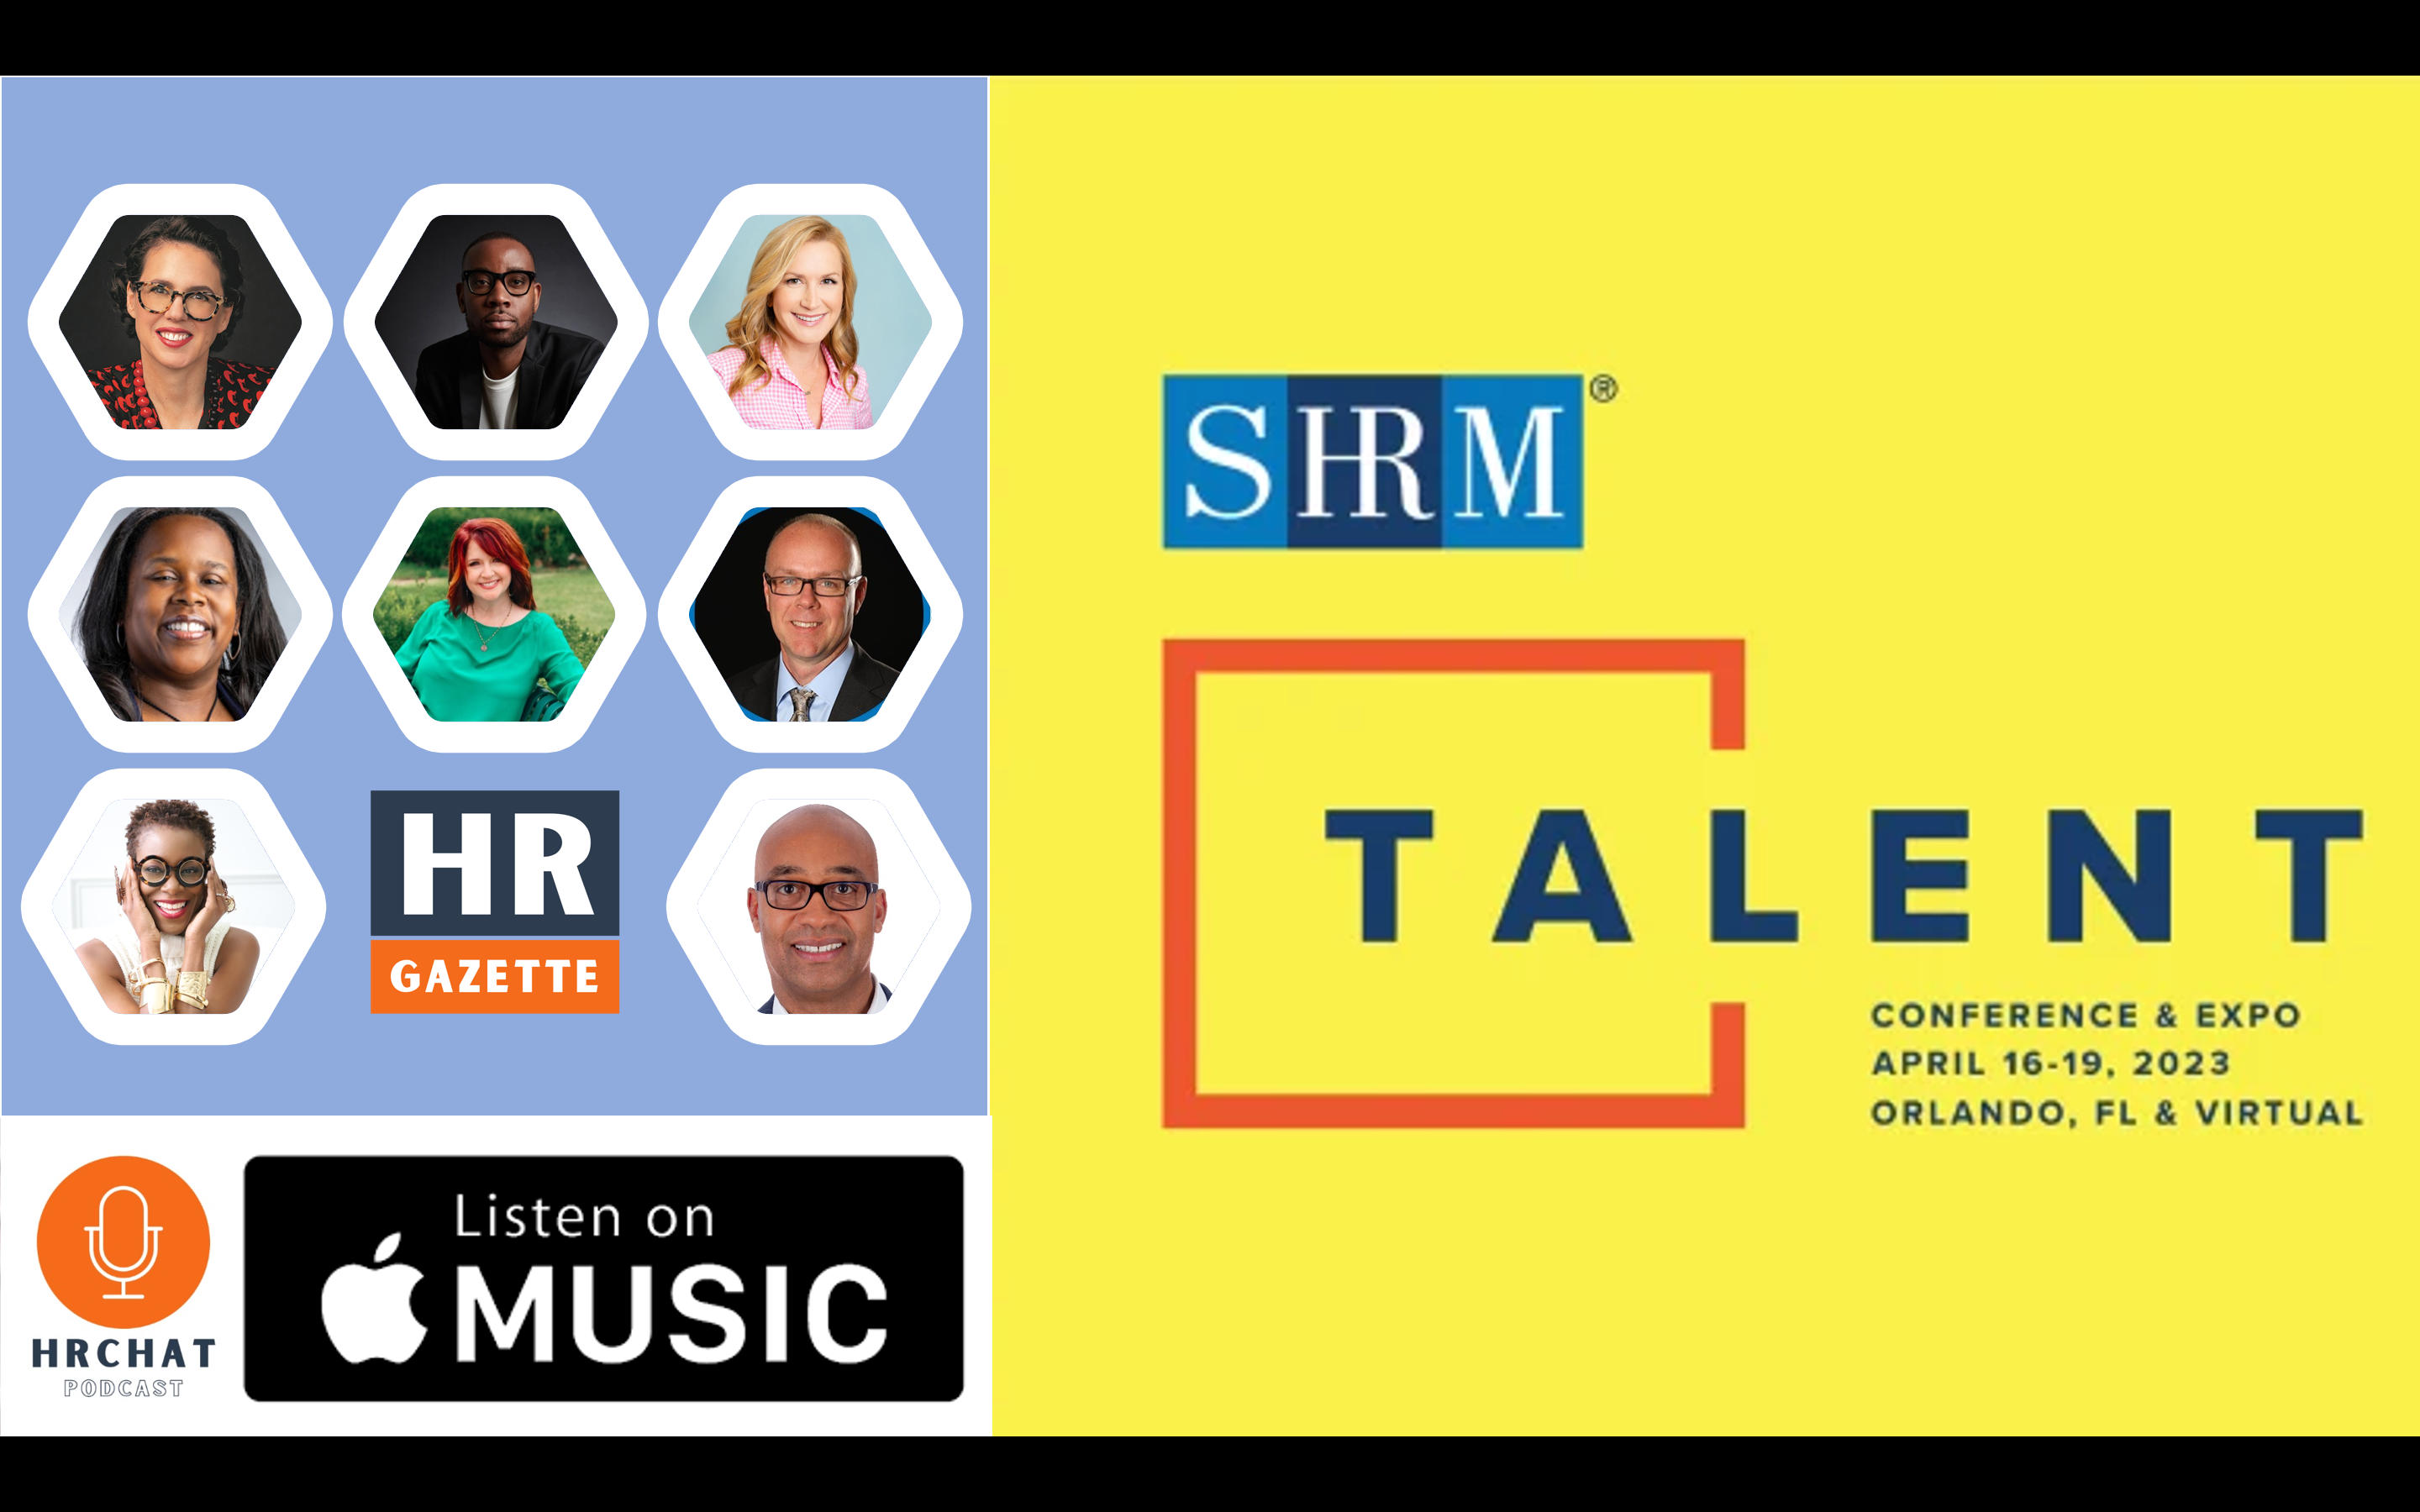 SHRM Talent 2023 Preview The HR Gazette and HRchat Podcast